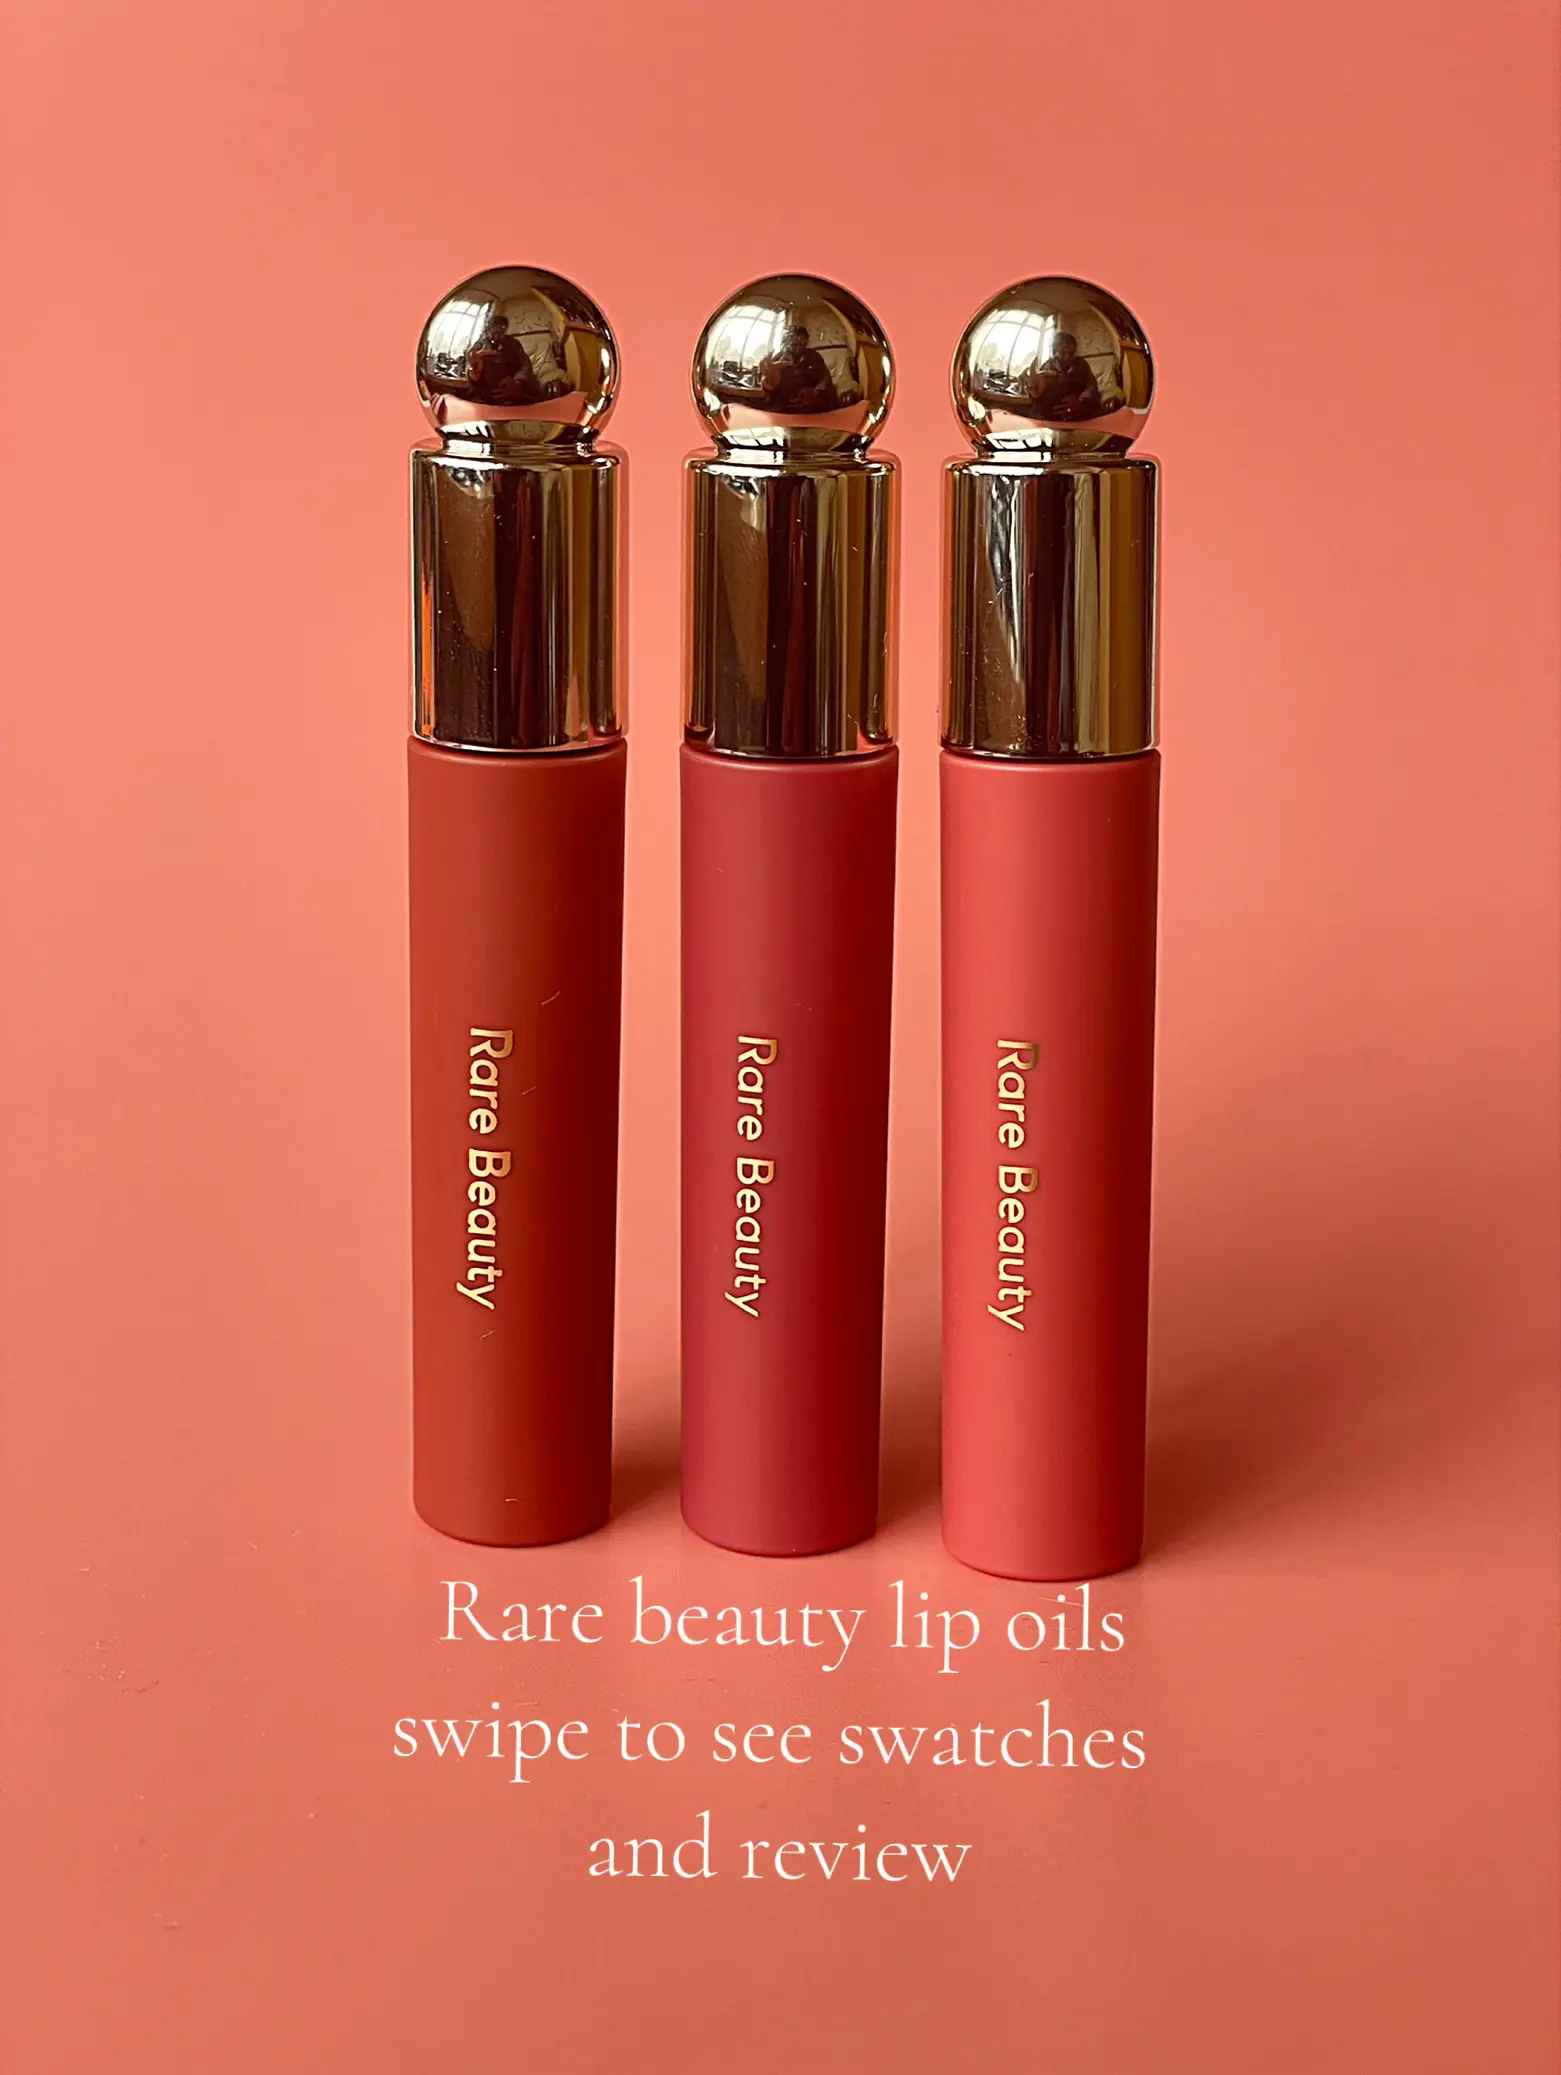 Rare Beauty Soft Pinch Tinted Lip Oil UK Review 7 Swatches